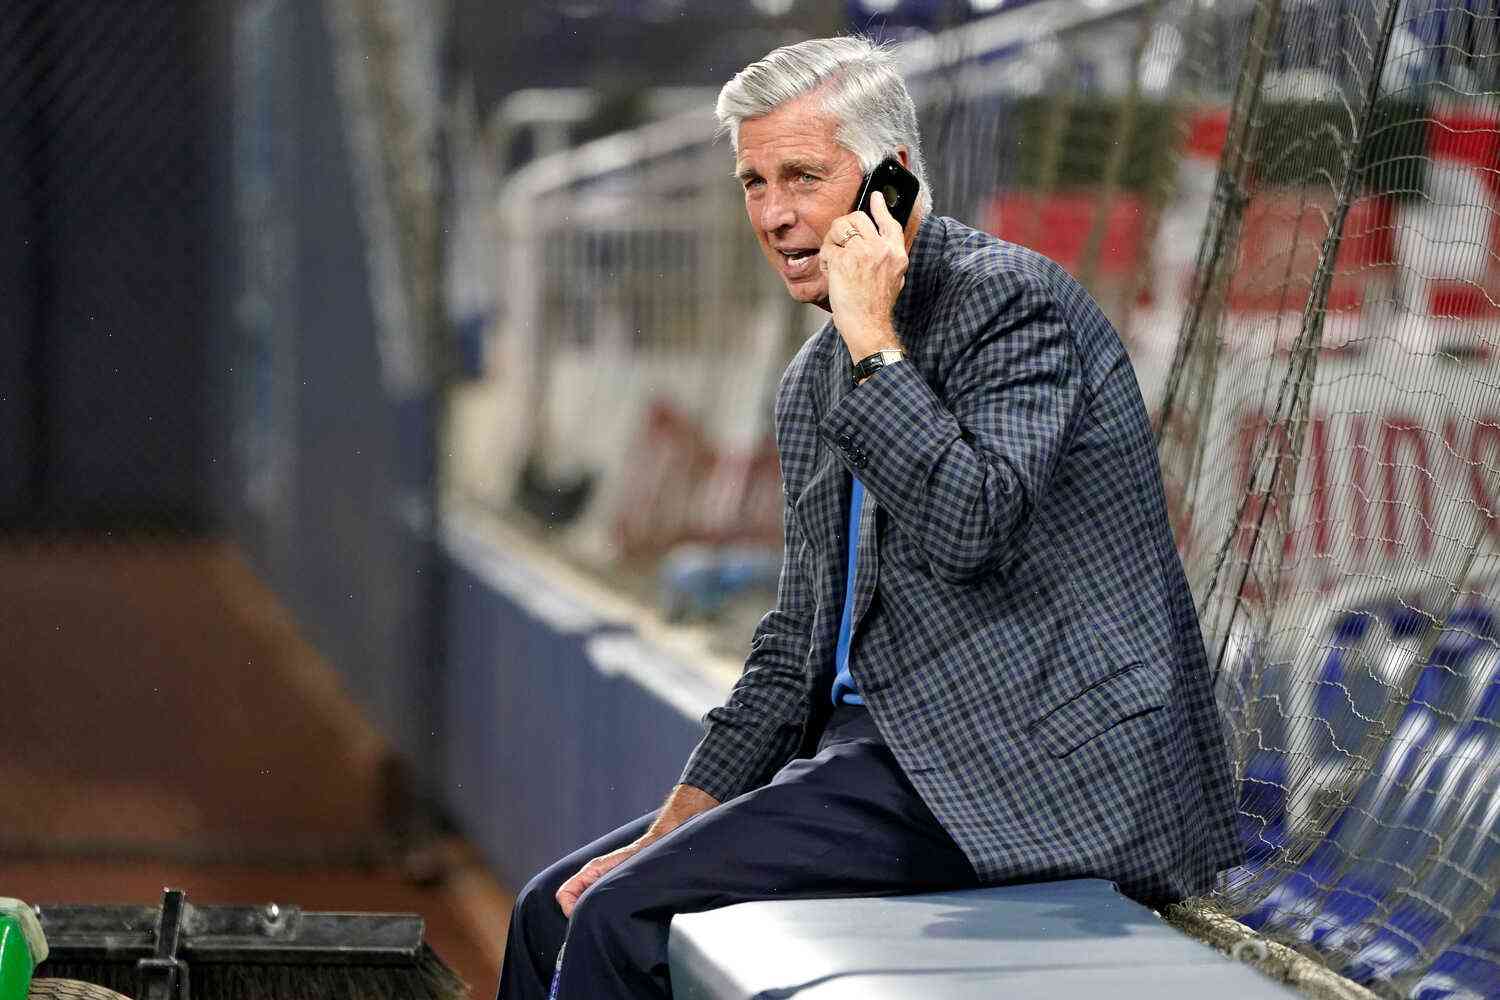 Dave Dombrowski: The New York Mets’ New General Manager